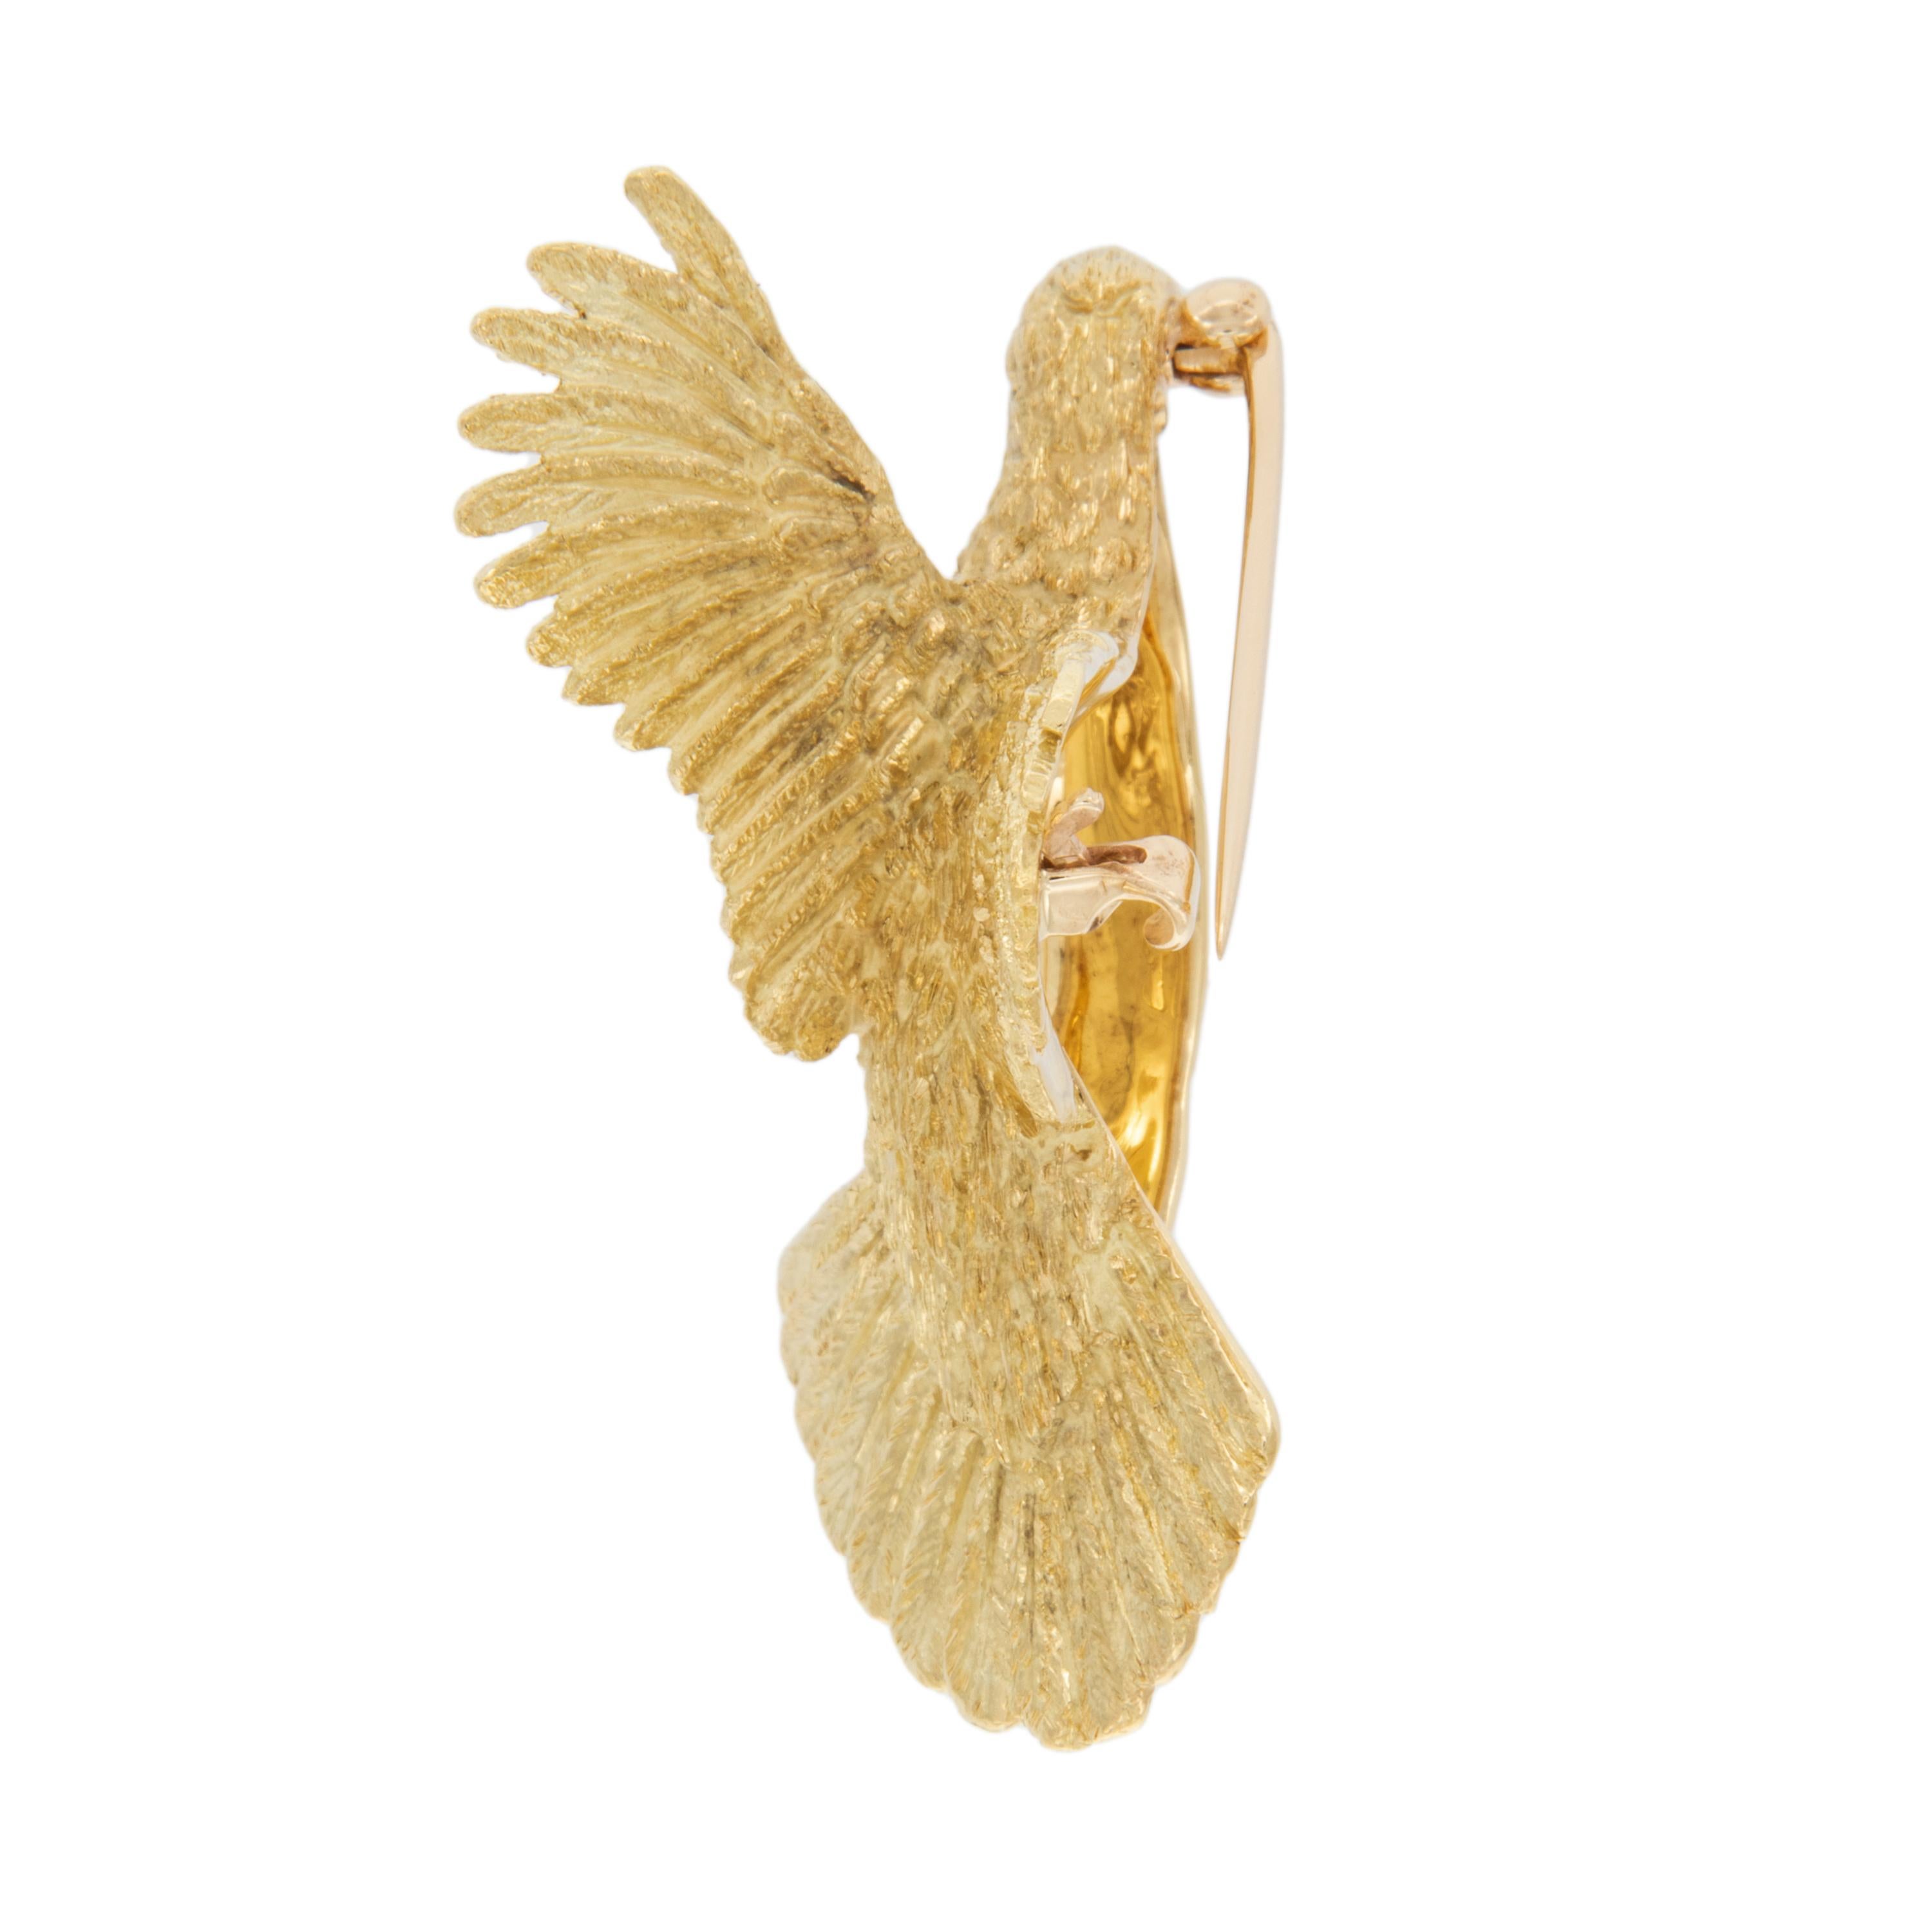 Exquisite and lifelike, this dimensional Grouse in flight made from rich 18 karat yellow gold can be worn as a brooch or converted to a pendant by Crossroads of Sport. Broch measures 46 x 33mm and is set off with detailed texture finish.